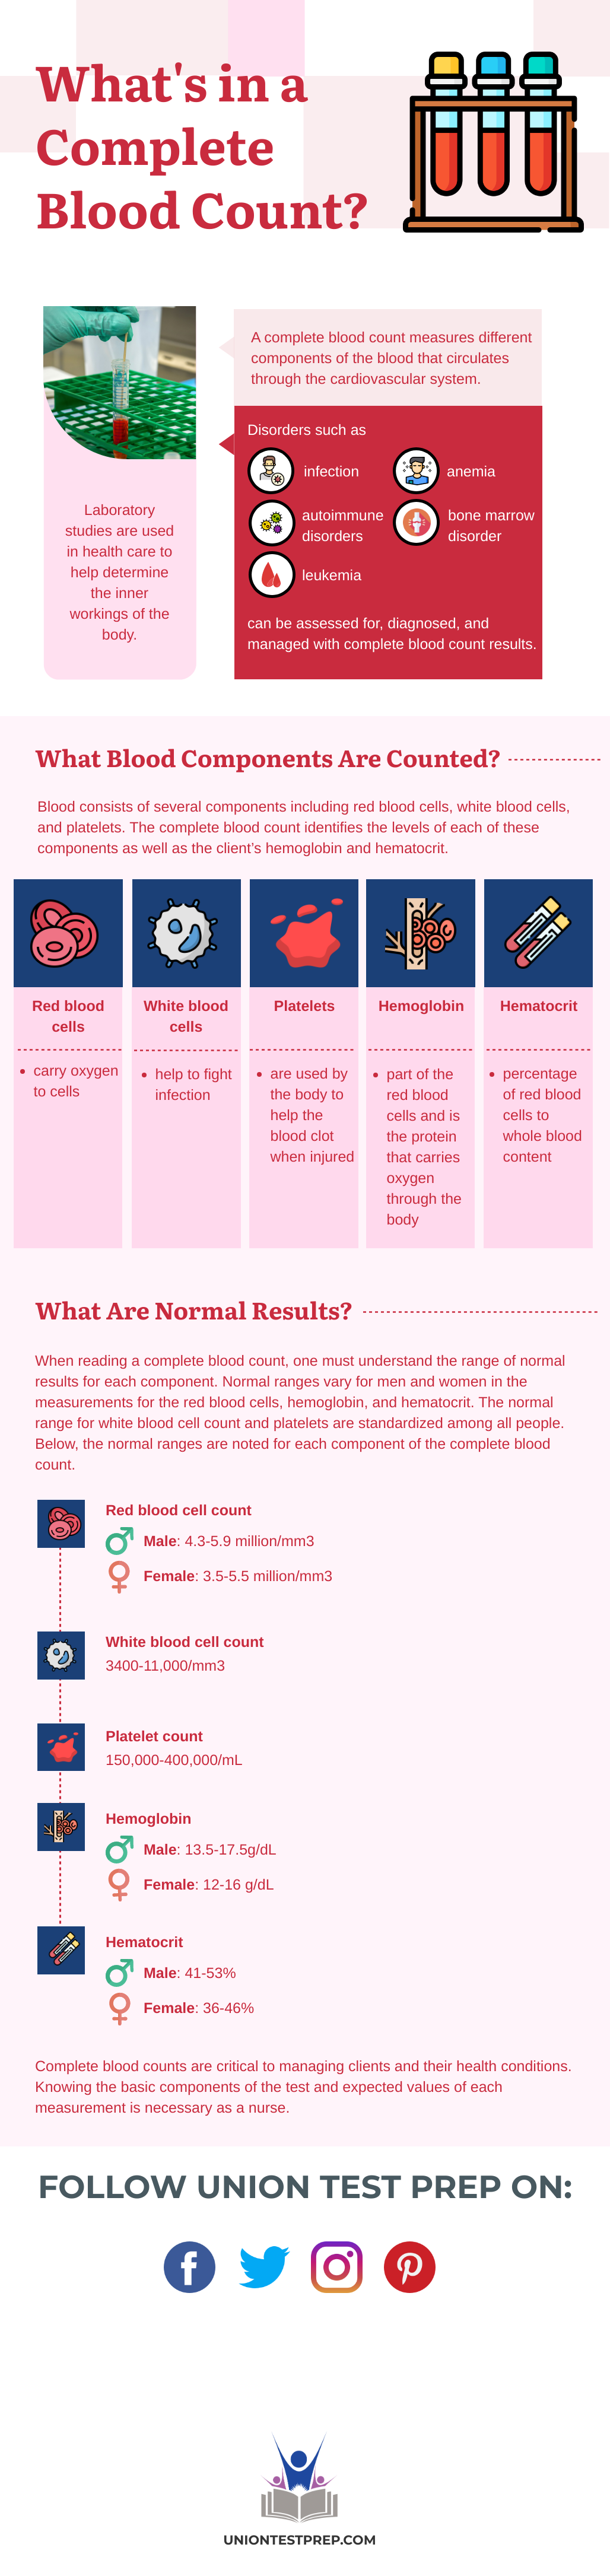 What's in a Complete Blood Count?